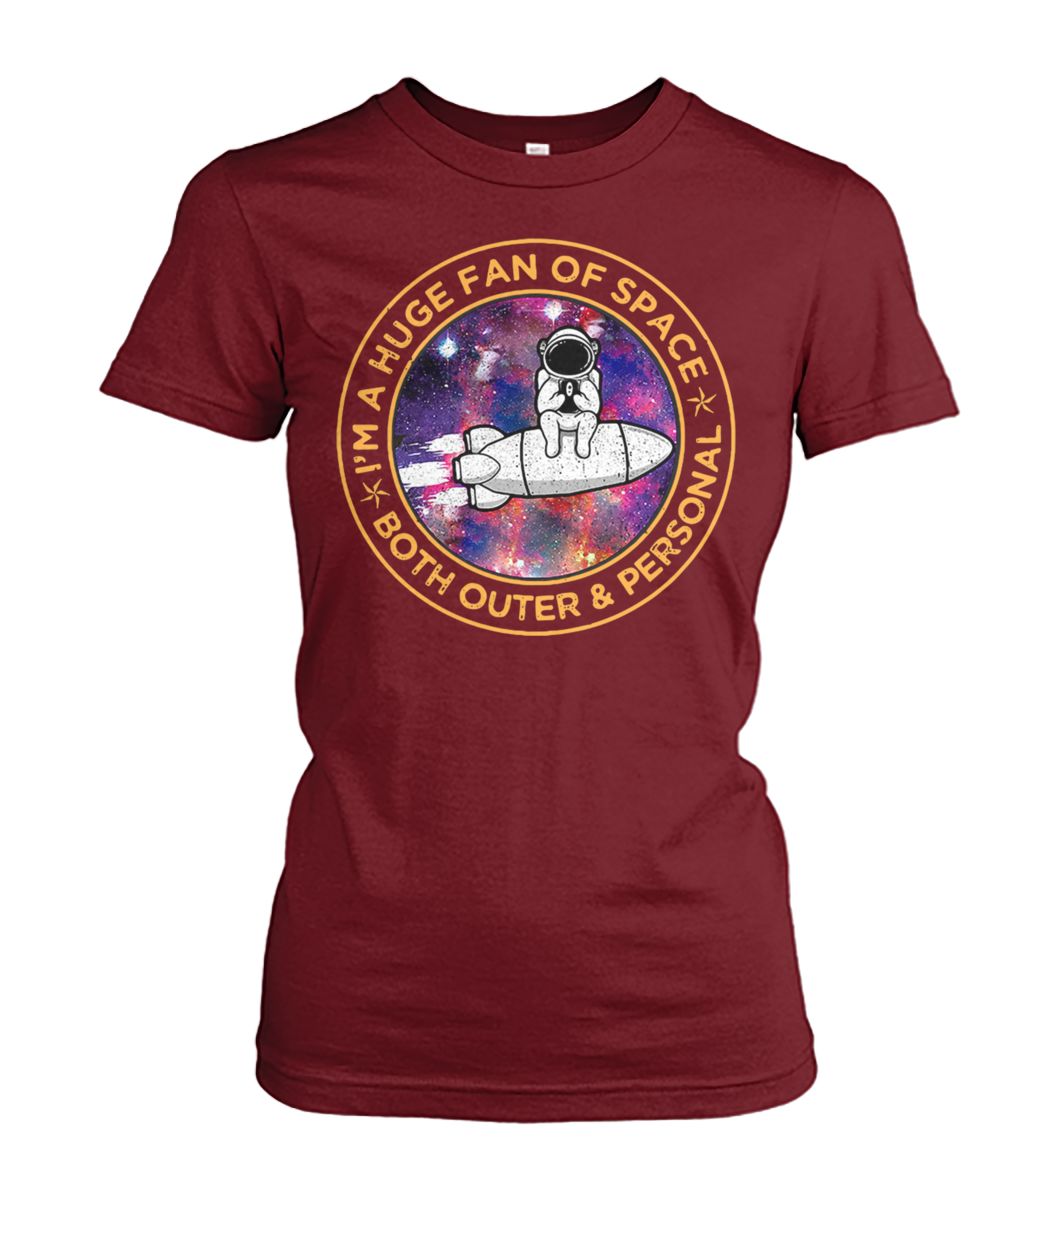 Astronaut I'm a huge fan of space both outer and personal women's crew tee